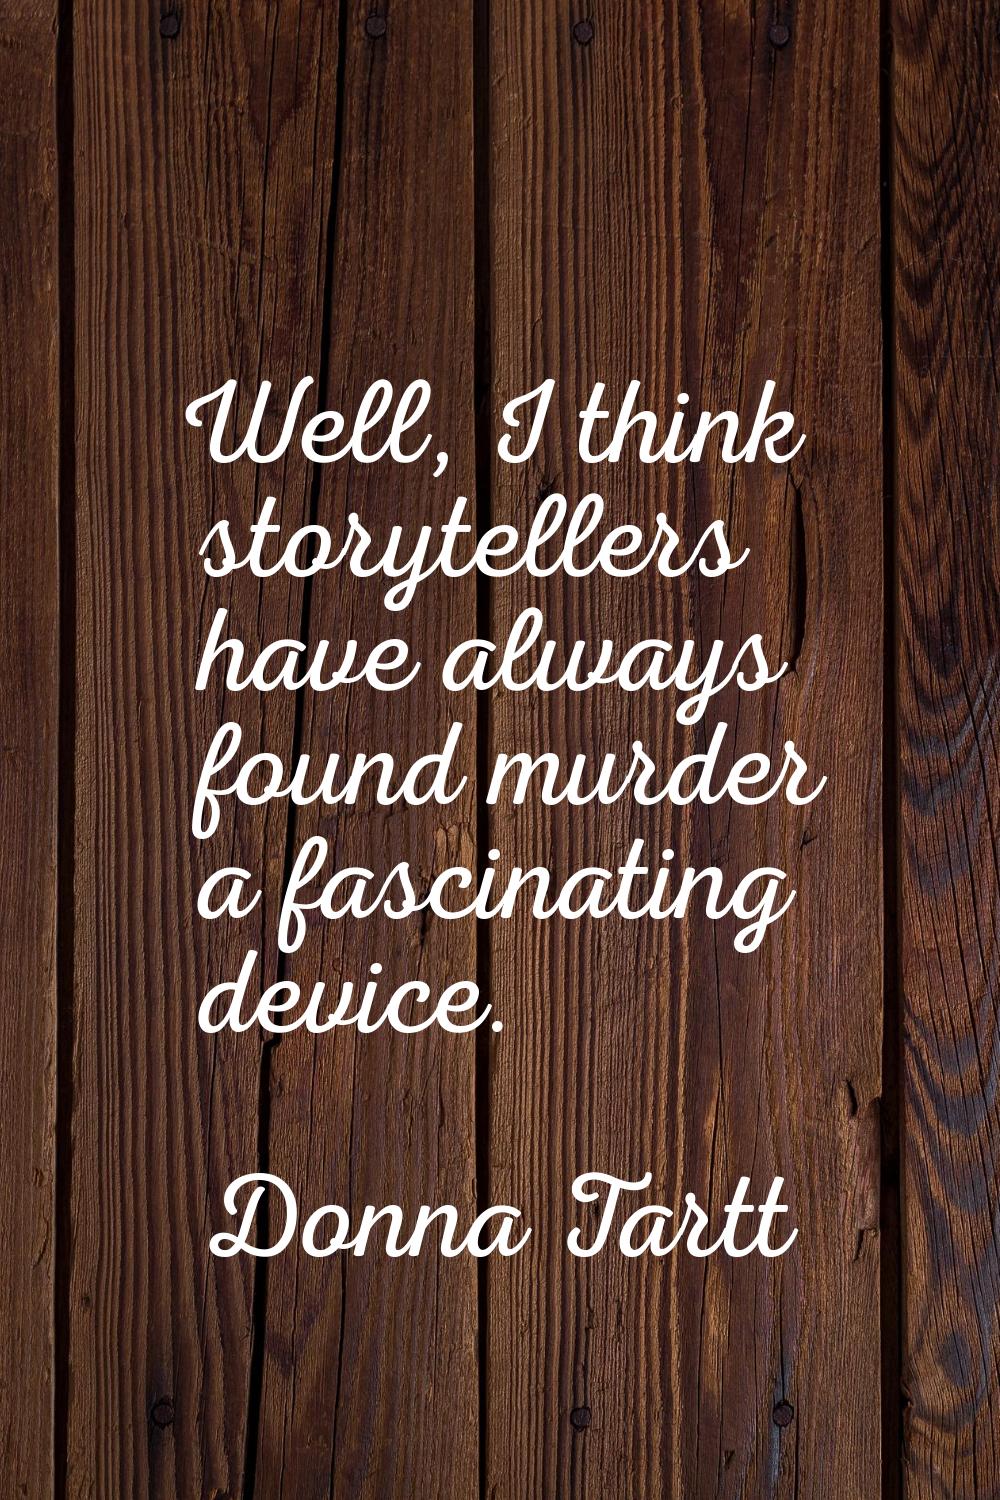 Well, I think storytellers have always found murder a fascinating device.